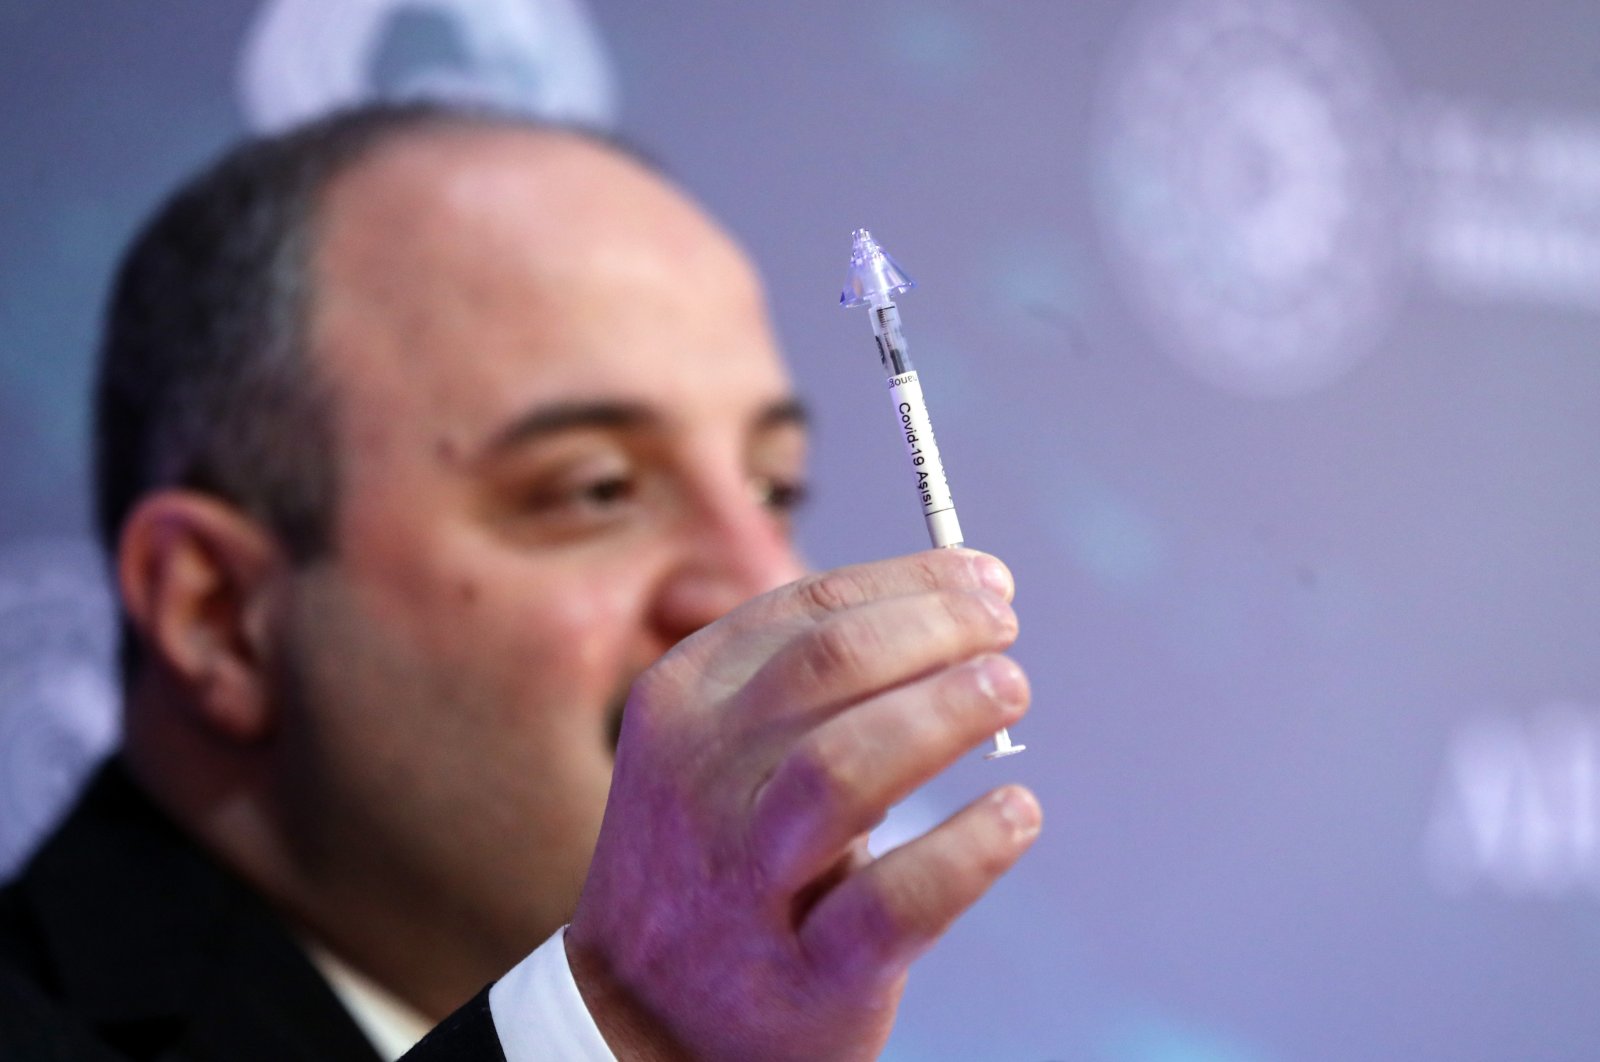 Minister of Industry and Technology Mustafa Varank holds a nasal vaccine during an event in the capital Ankara, Turkey, March 31, 2021. (AA PHOTO)